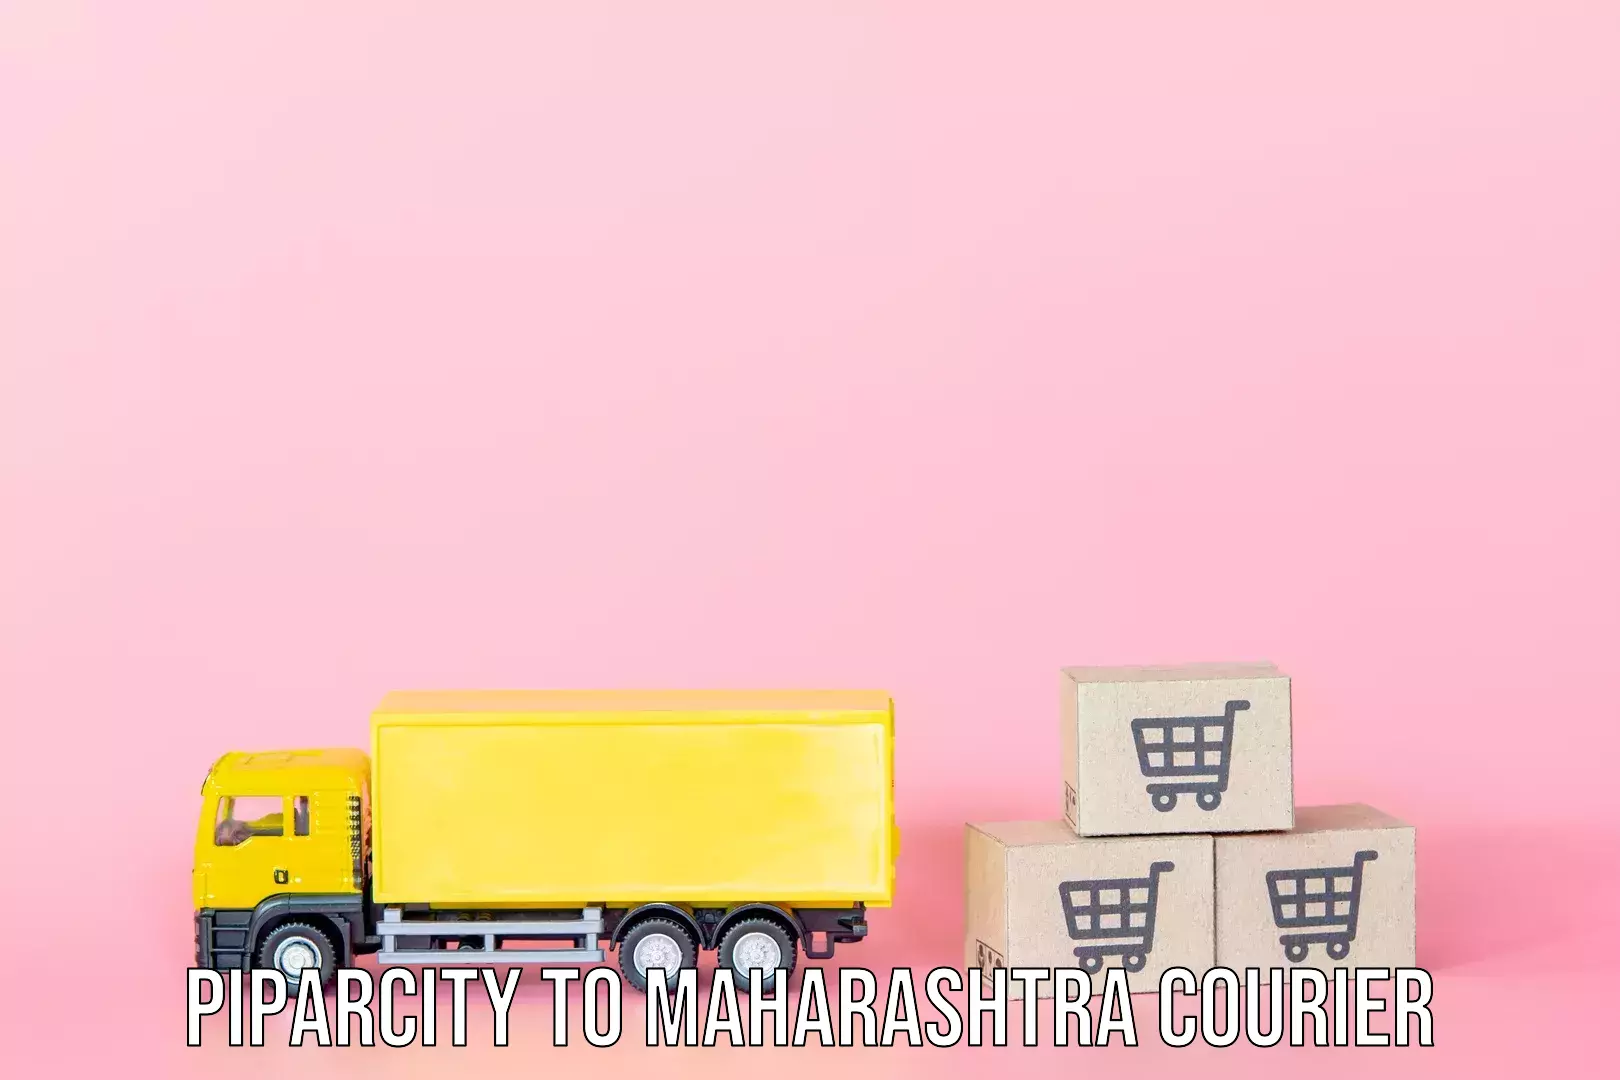 Luggage transport consultancy Piparcity to Kopargaon